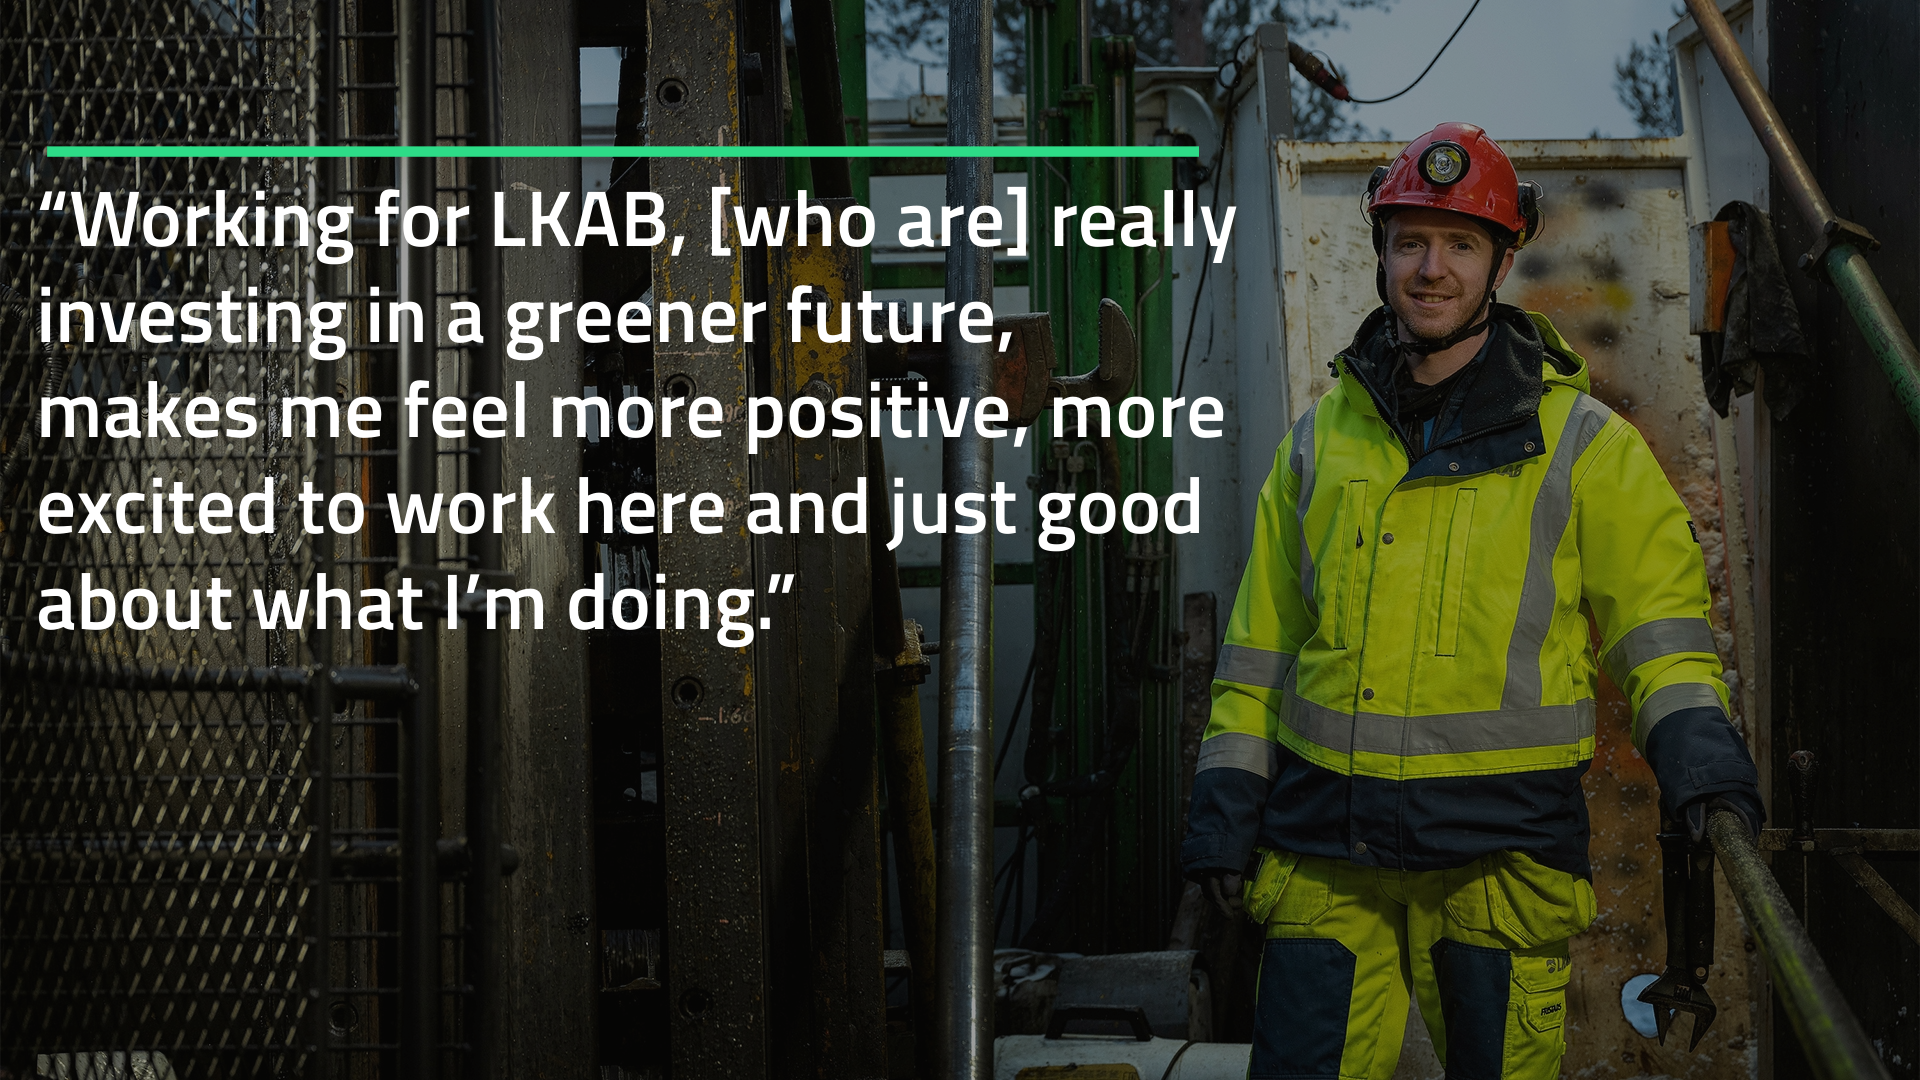 Man in high visibility clothes outdoors in winter. With quote in the image: "Working for LKAB, [who are] really investing in a greener future, makes me feel more positive, more excited to work here and just good about what I'm doing." 